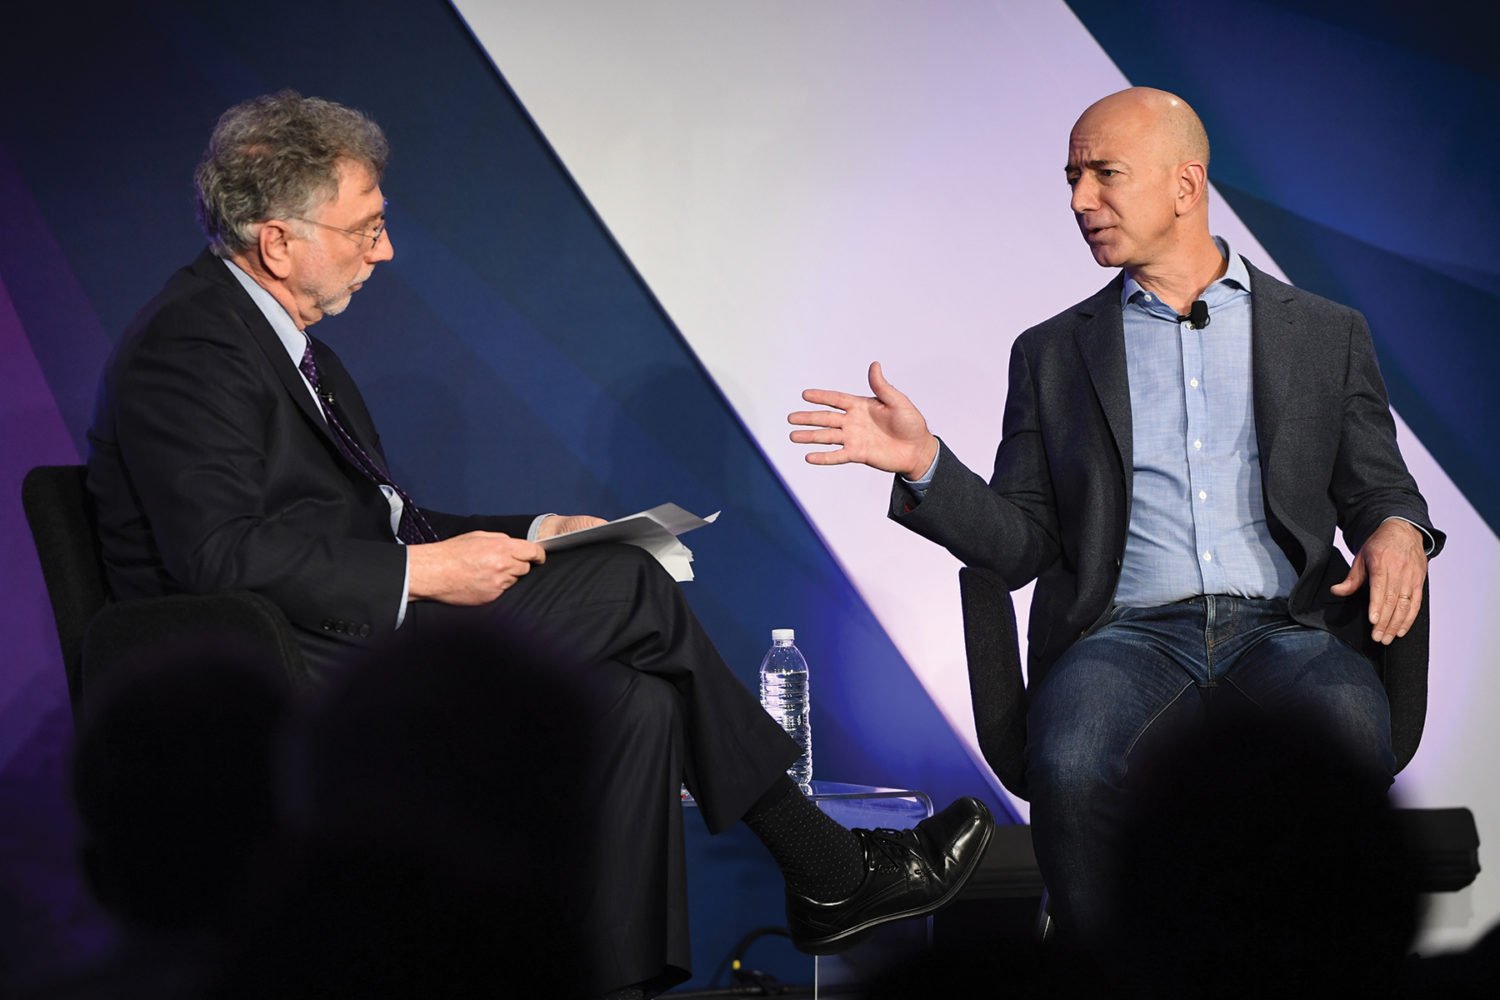 Post editor Marty Baron with owner Jeff Bezos. Photograph by Linda Davidson/Getty Images.